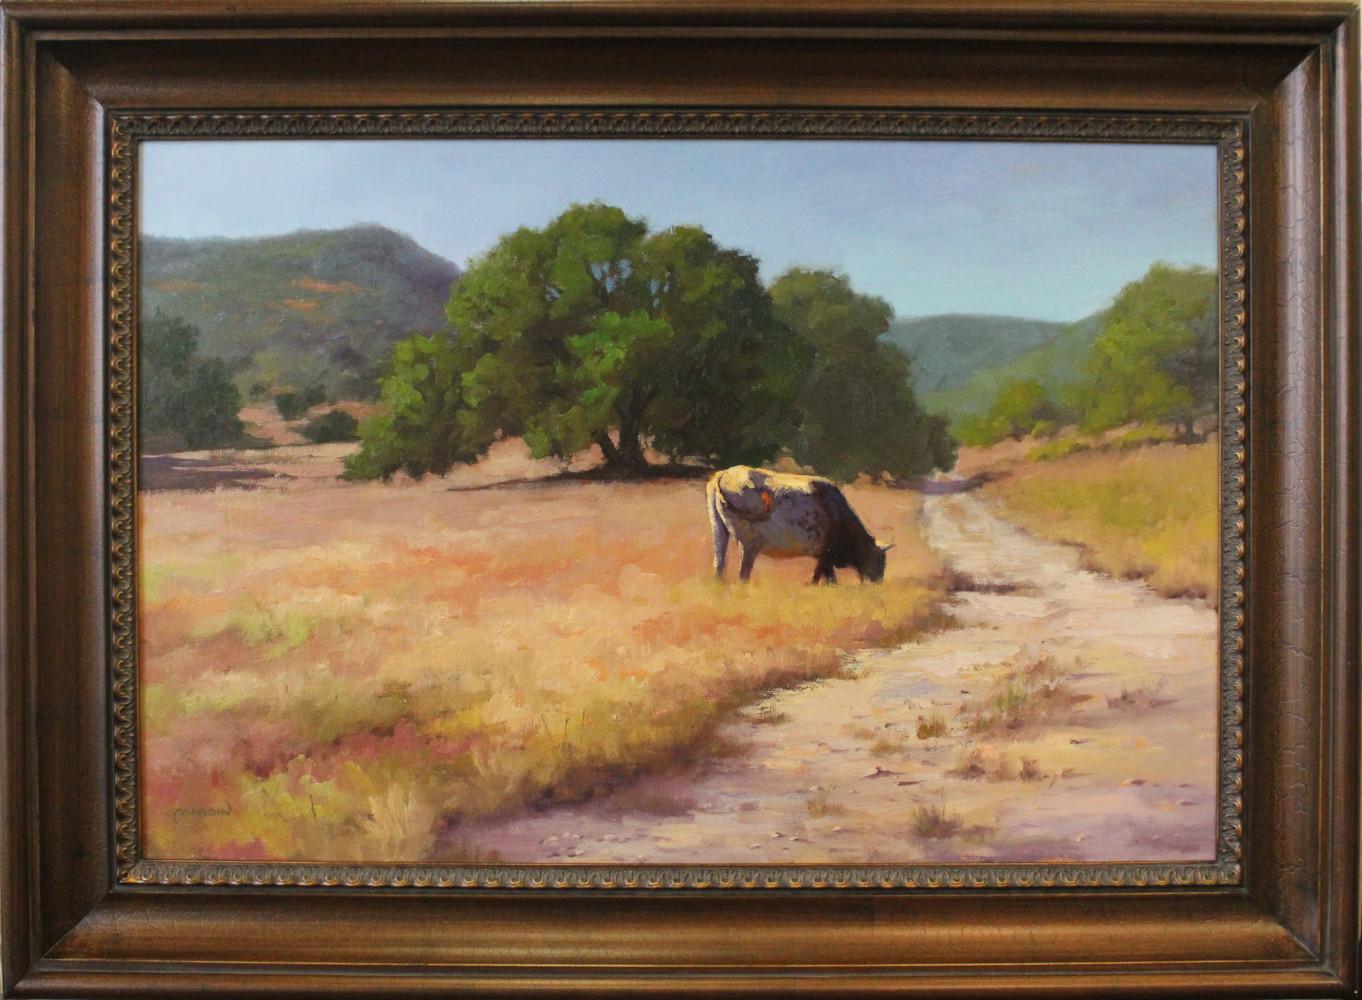 CHUCK MAULDIN Landscape Painting - "HEAVY GRAZER" CATTLE TEXAS HILL COUNTRY